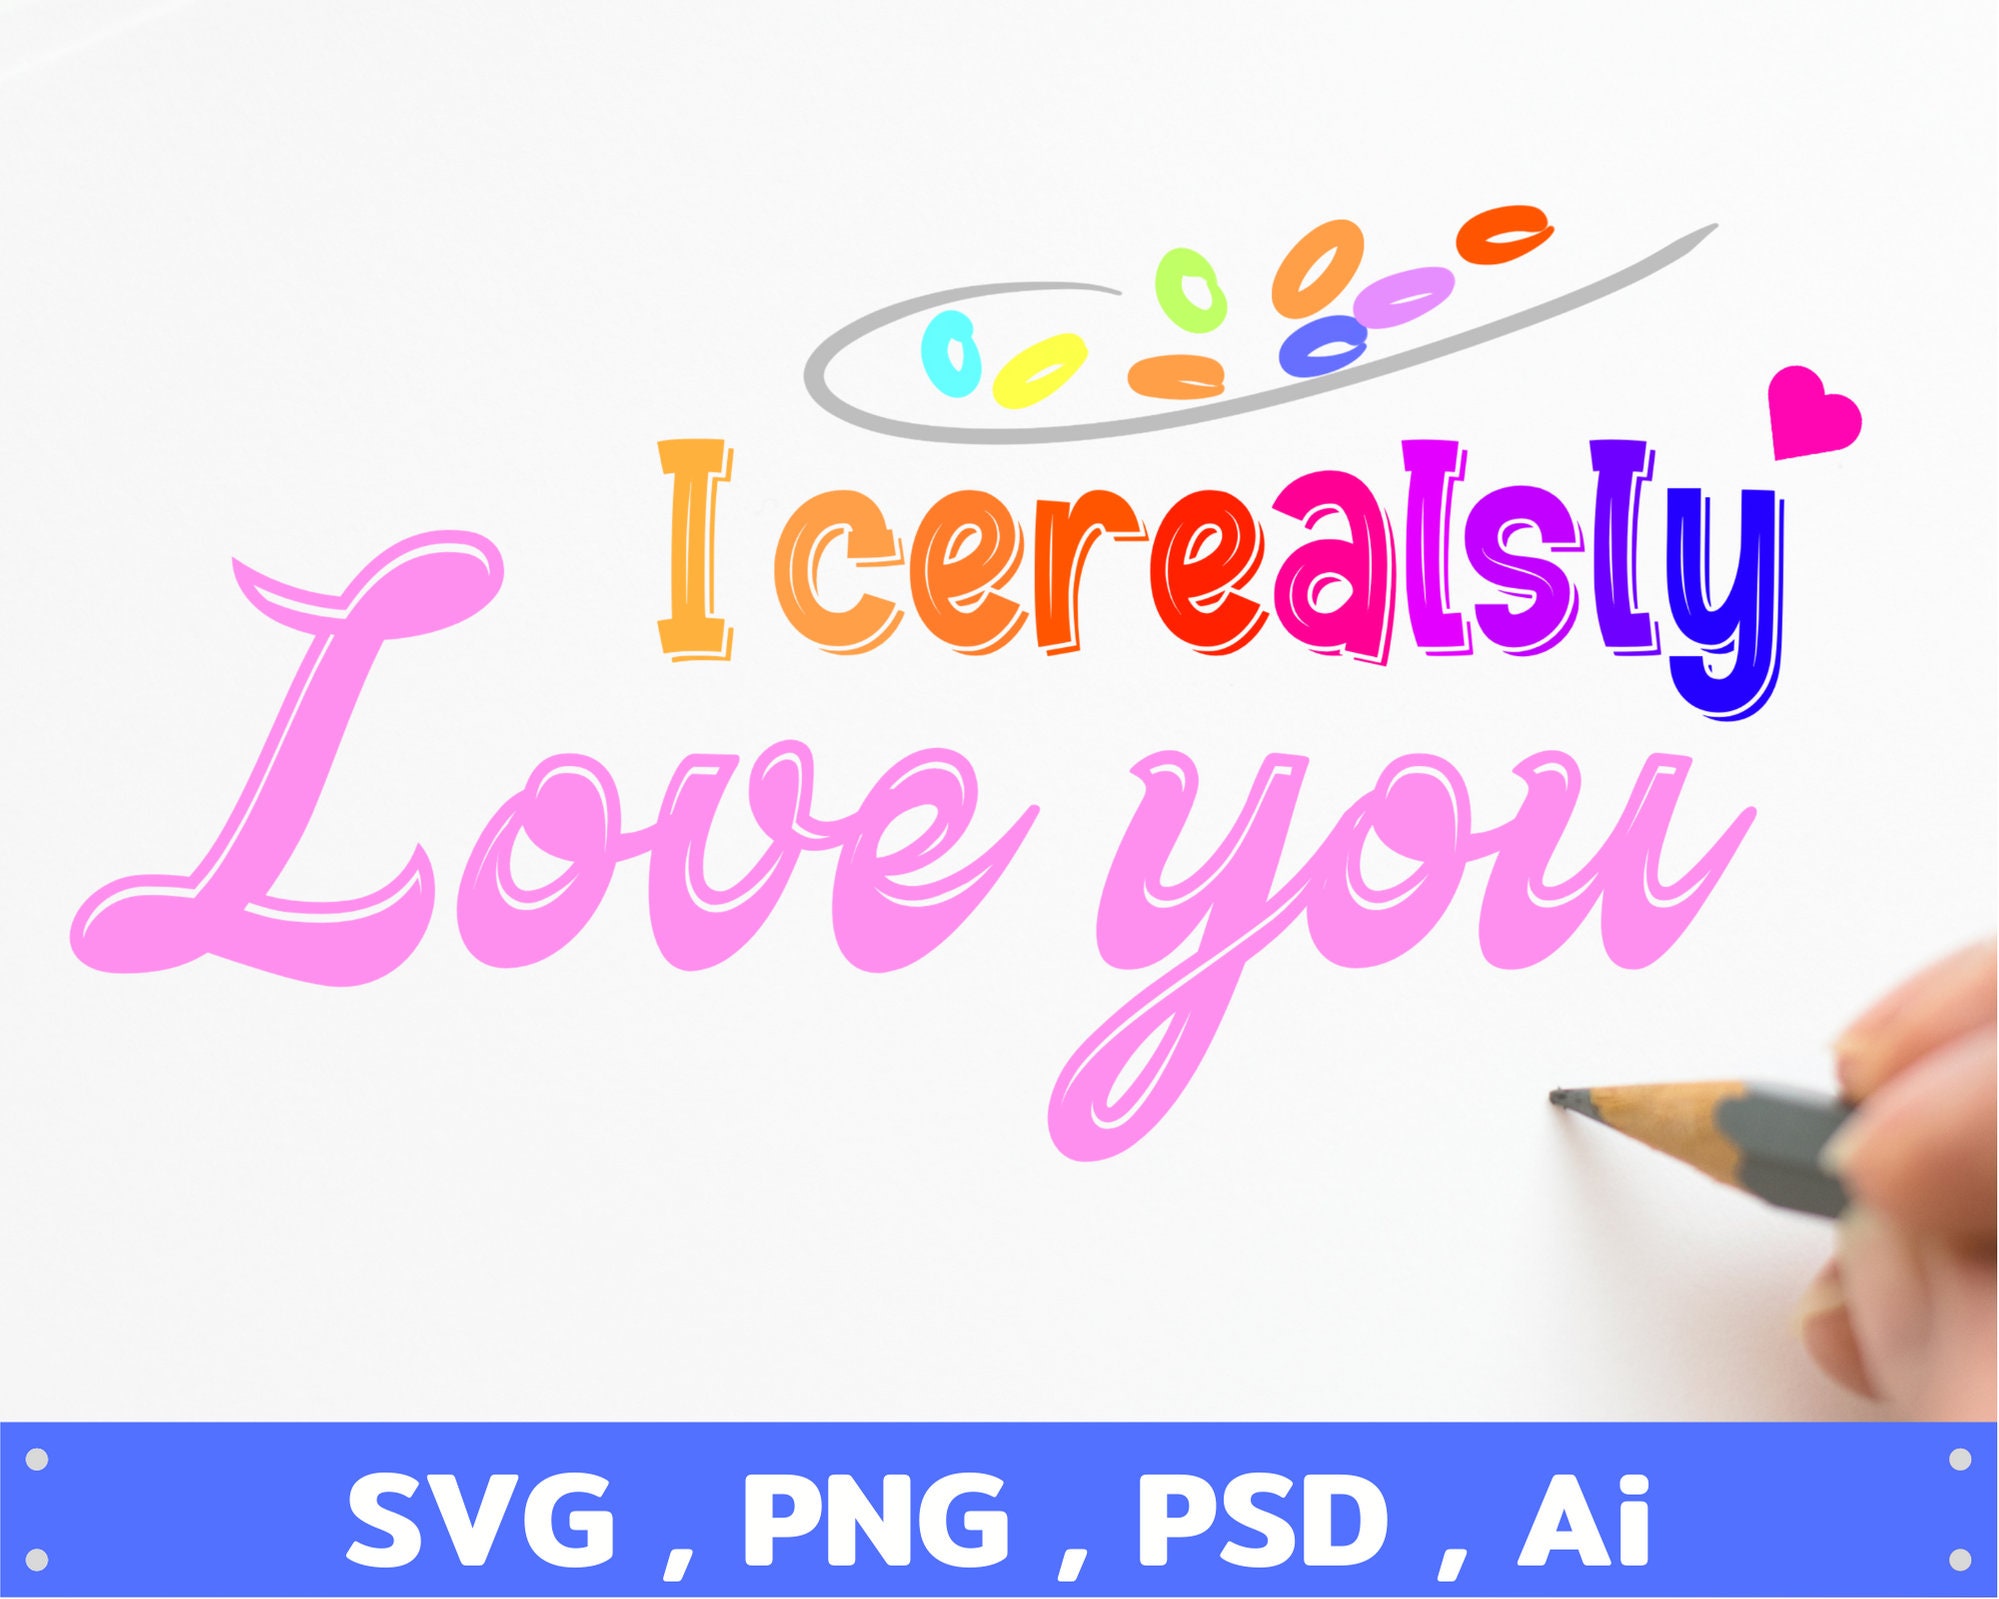 Download I Cerealsly Love You svg png Ai psd Cereales Bucles de | Etsy